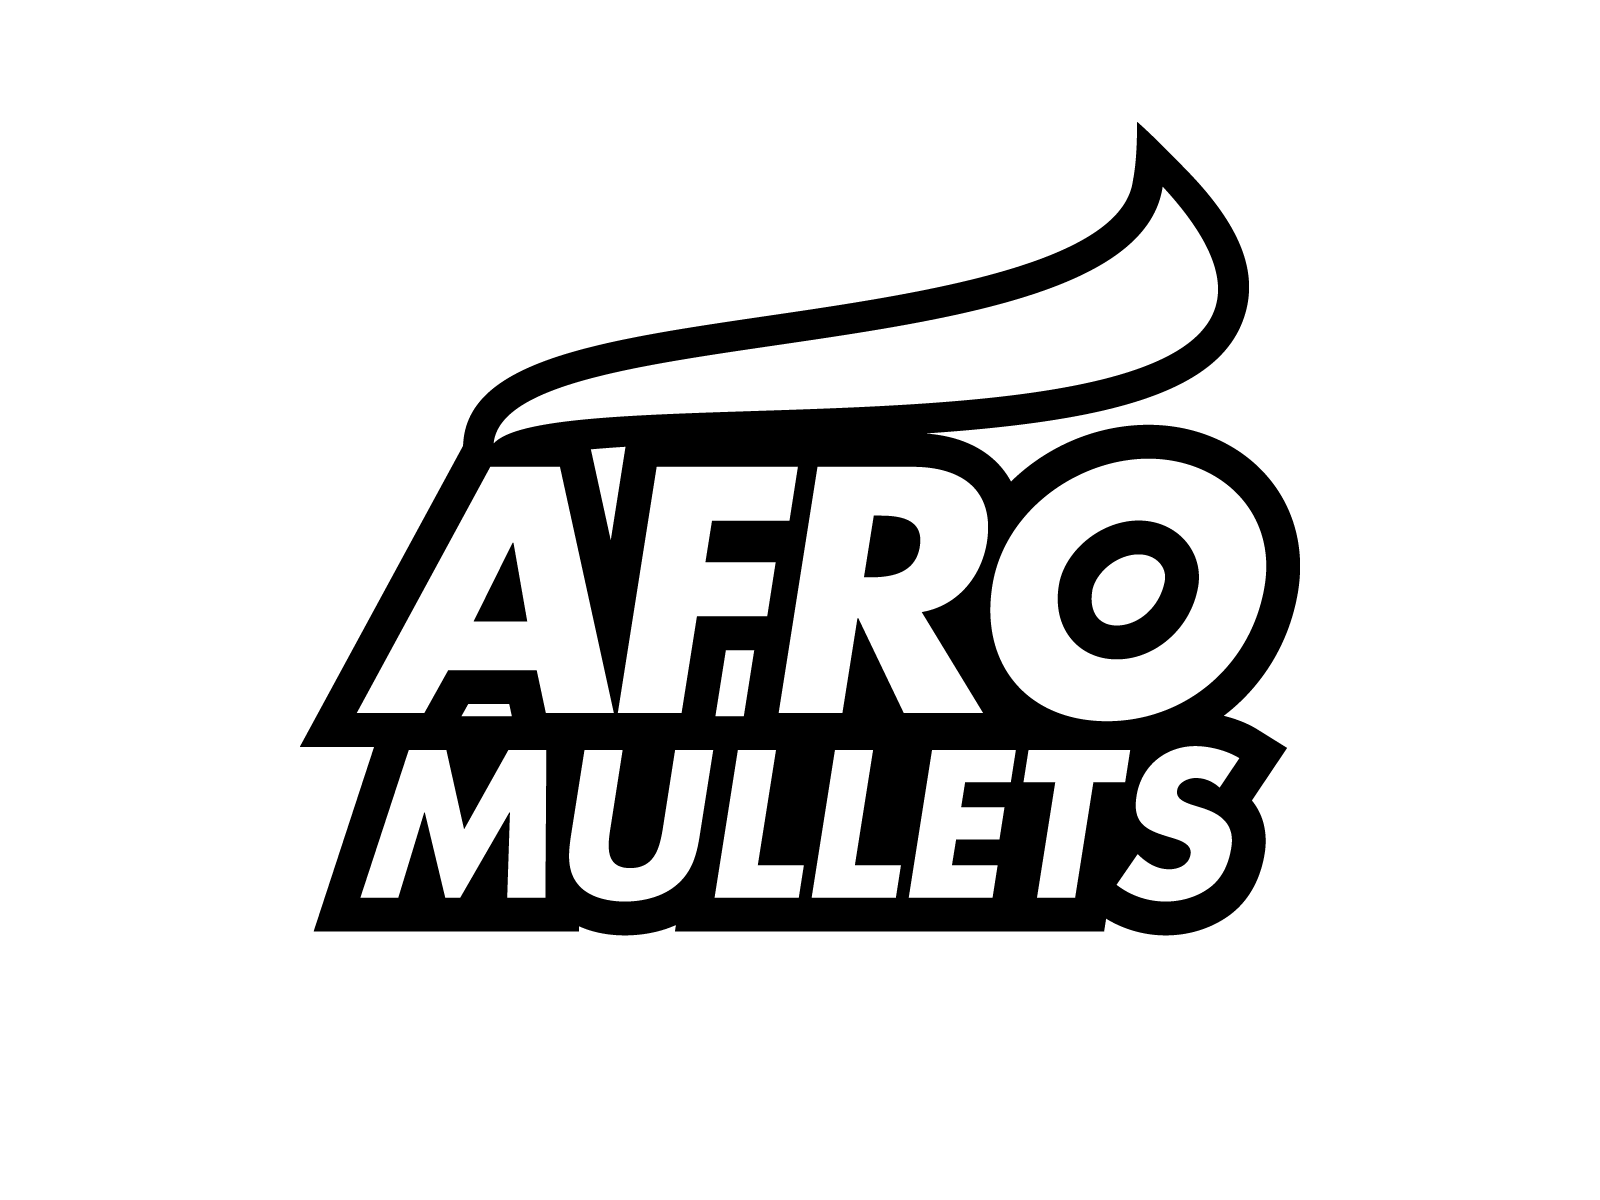 afromullets